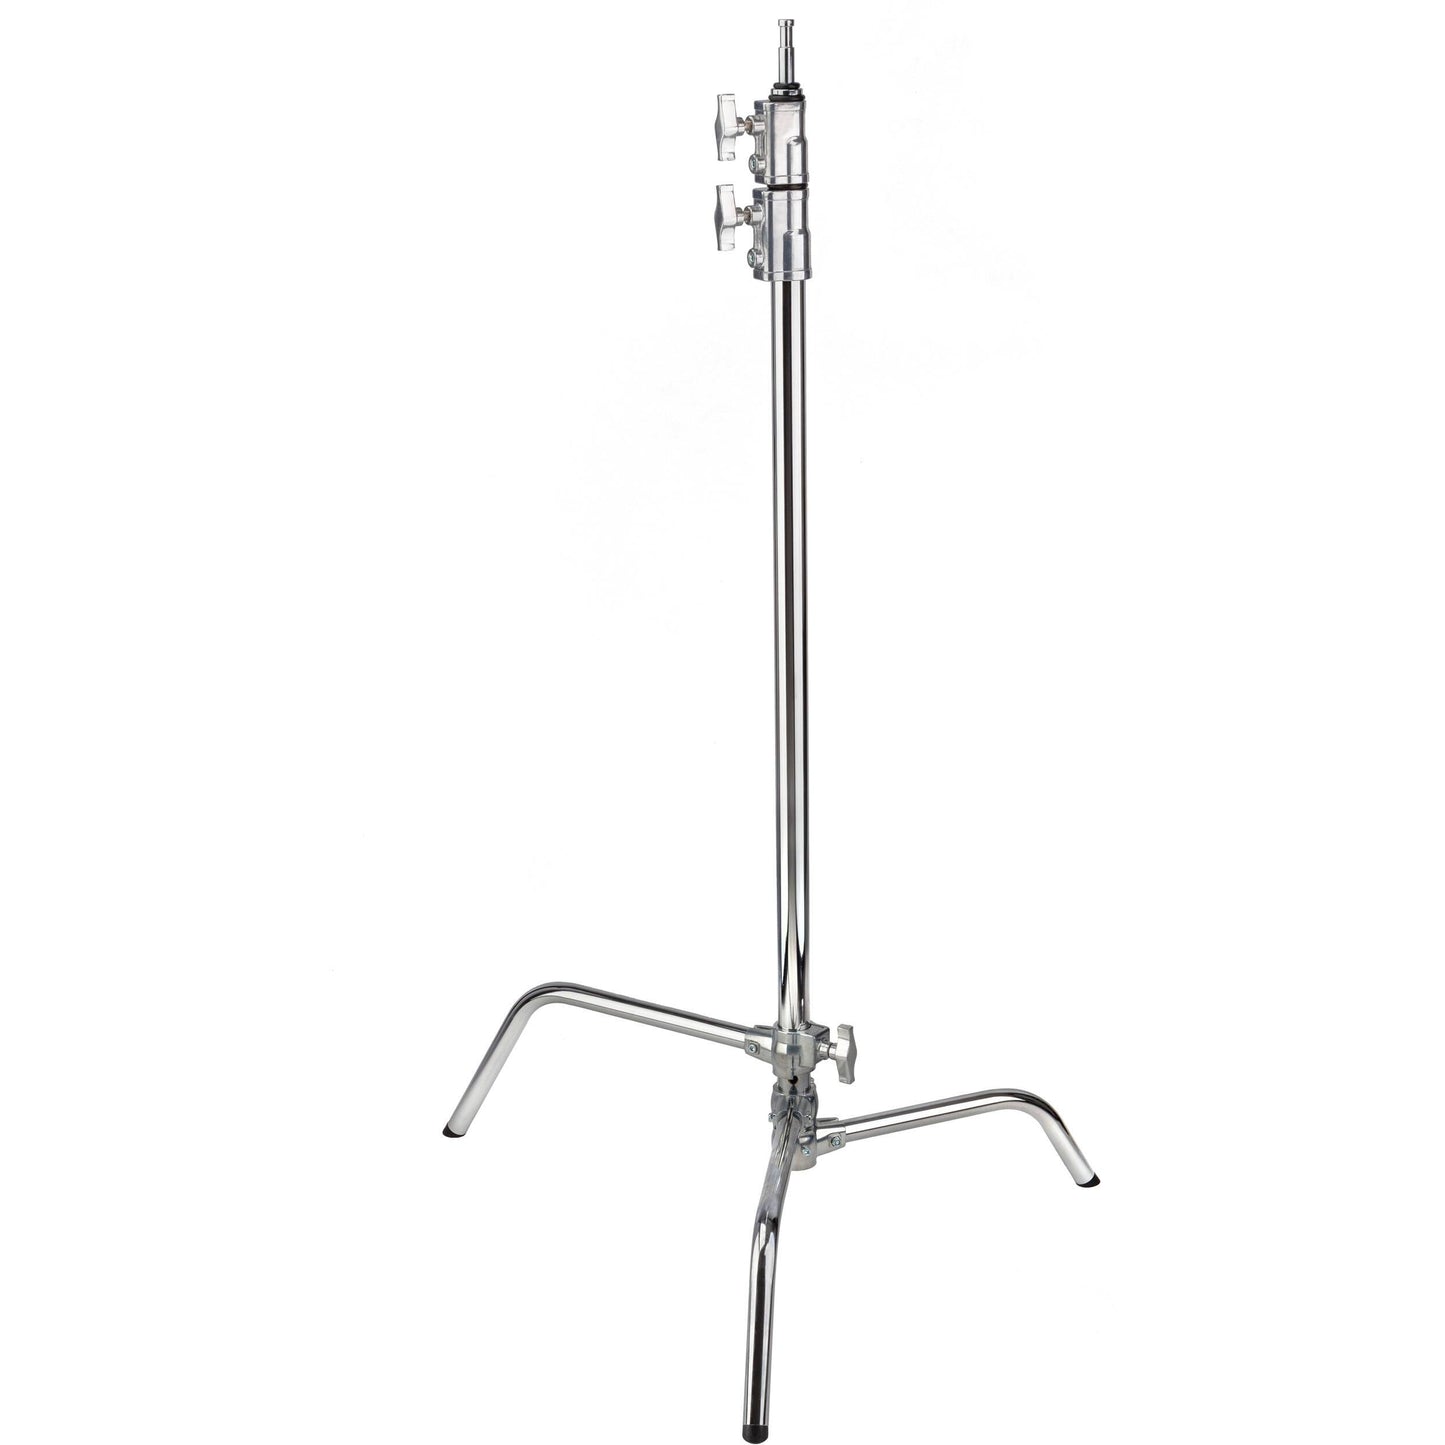 C-Stand With Quick Release Sliding Leg (Chrome) W/ Quick Release Leveling Leg 40" Main Section, 2